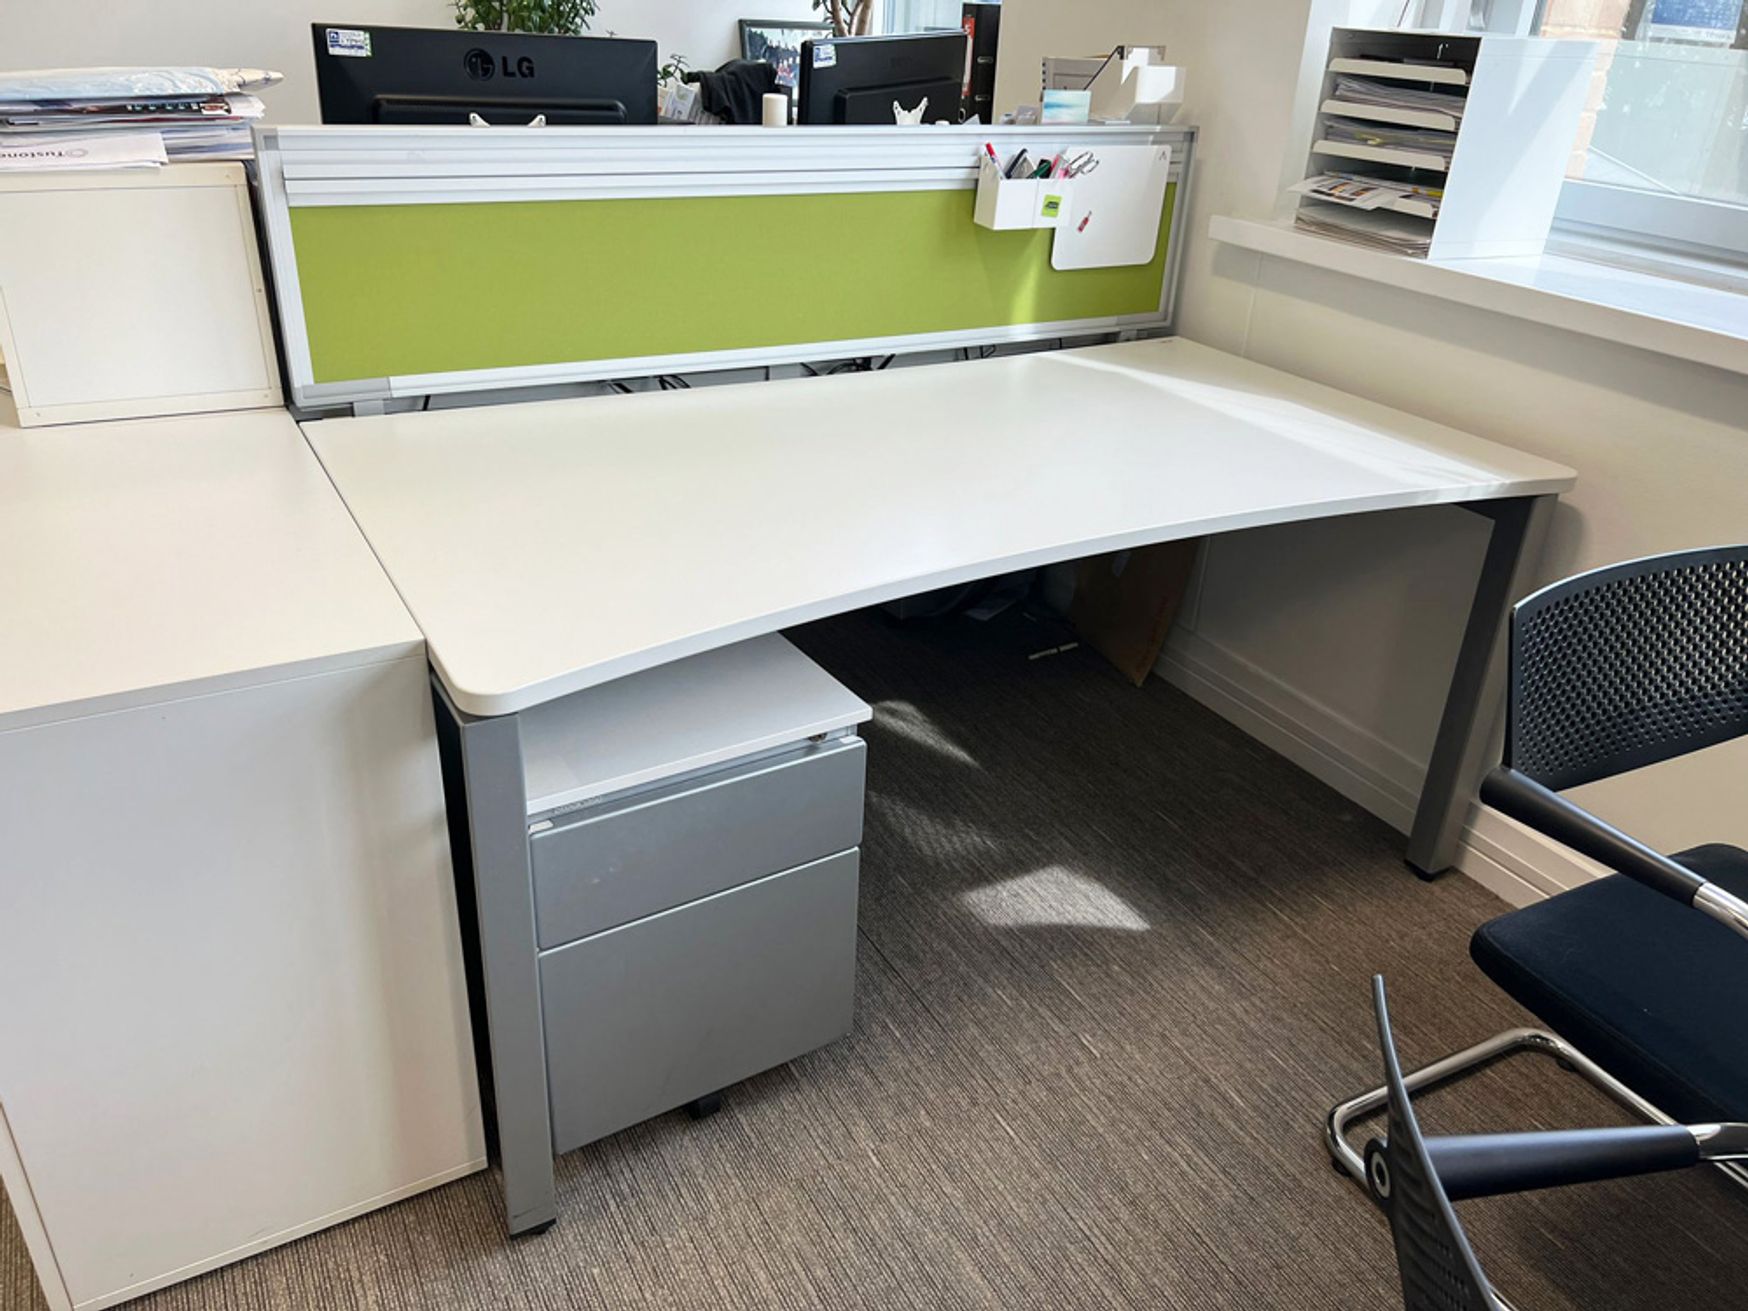 70 x Used 'Steelcase' sliding-top curved front white desks - 1600mm wide. Price includes Steelcase pedestal.